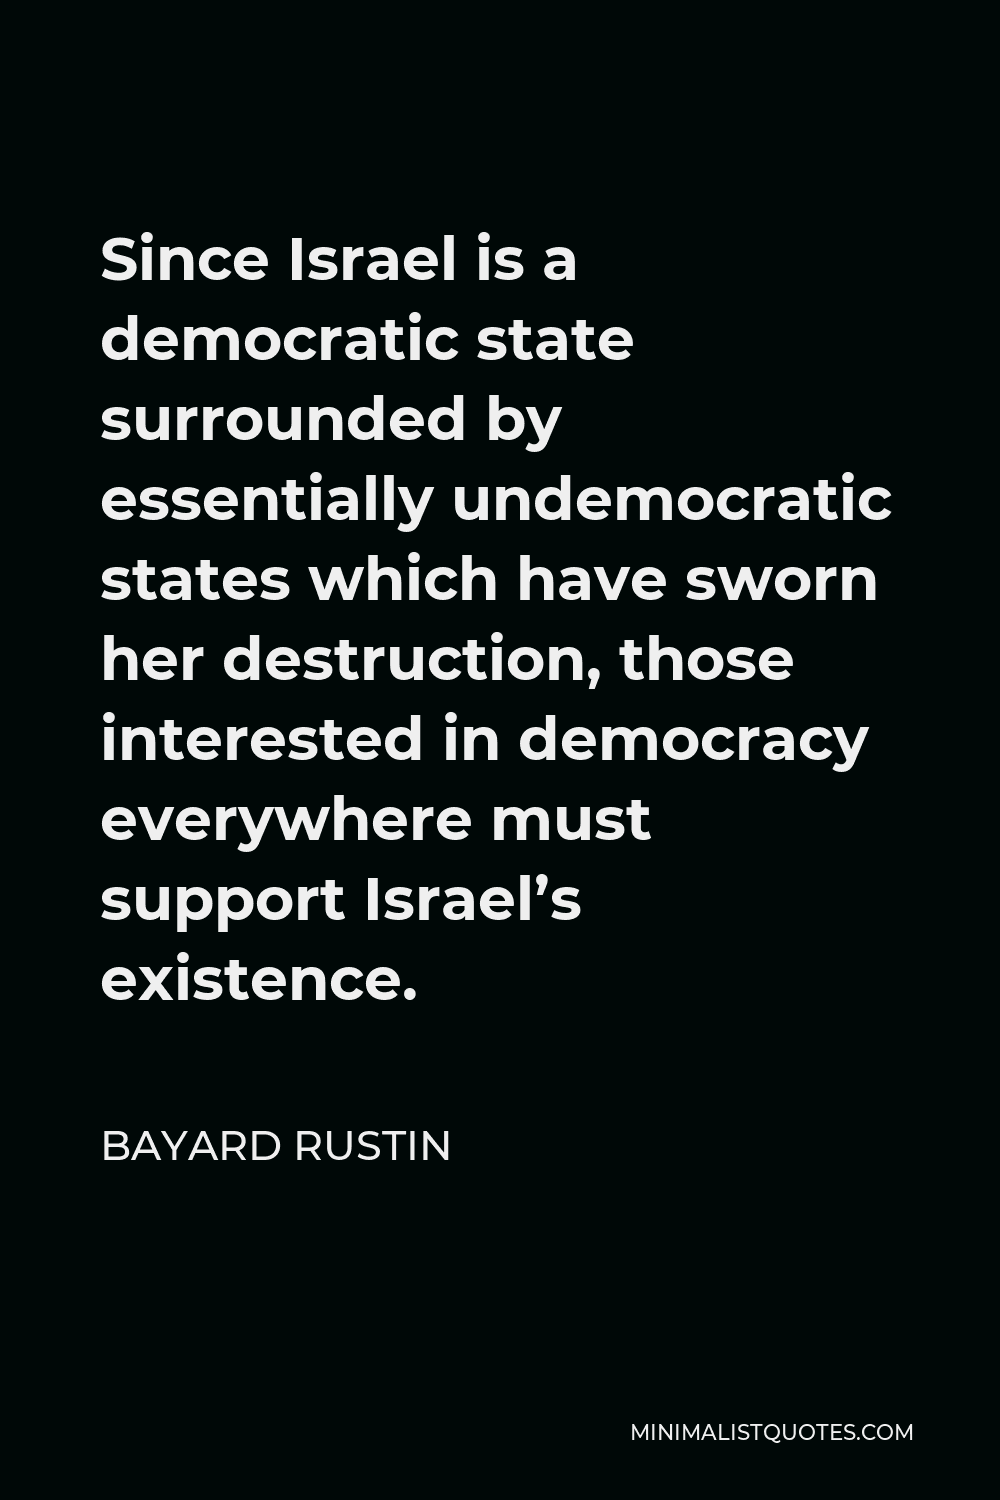 Bayard Rustin Quote - Since Israel is a democratic state surrounded by essentially undemocratic states which have sworn her destruction, those interested in democracy everywhere must support Israel’s existence.